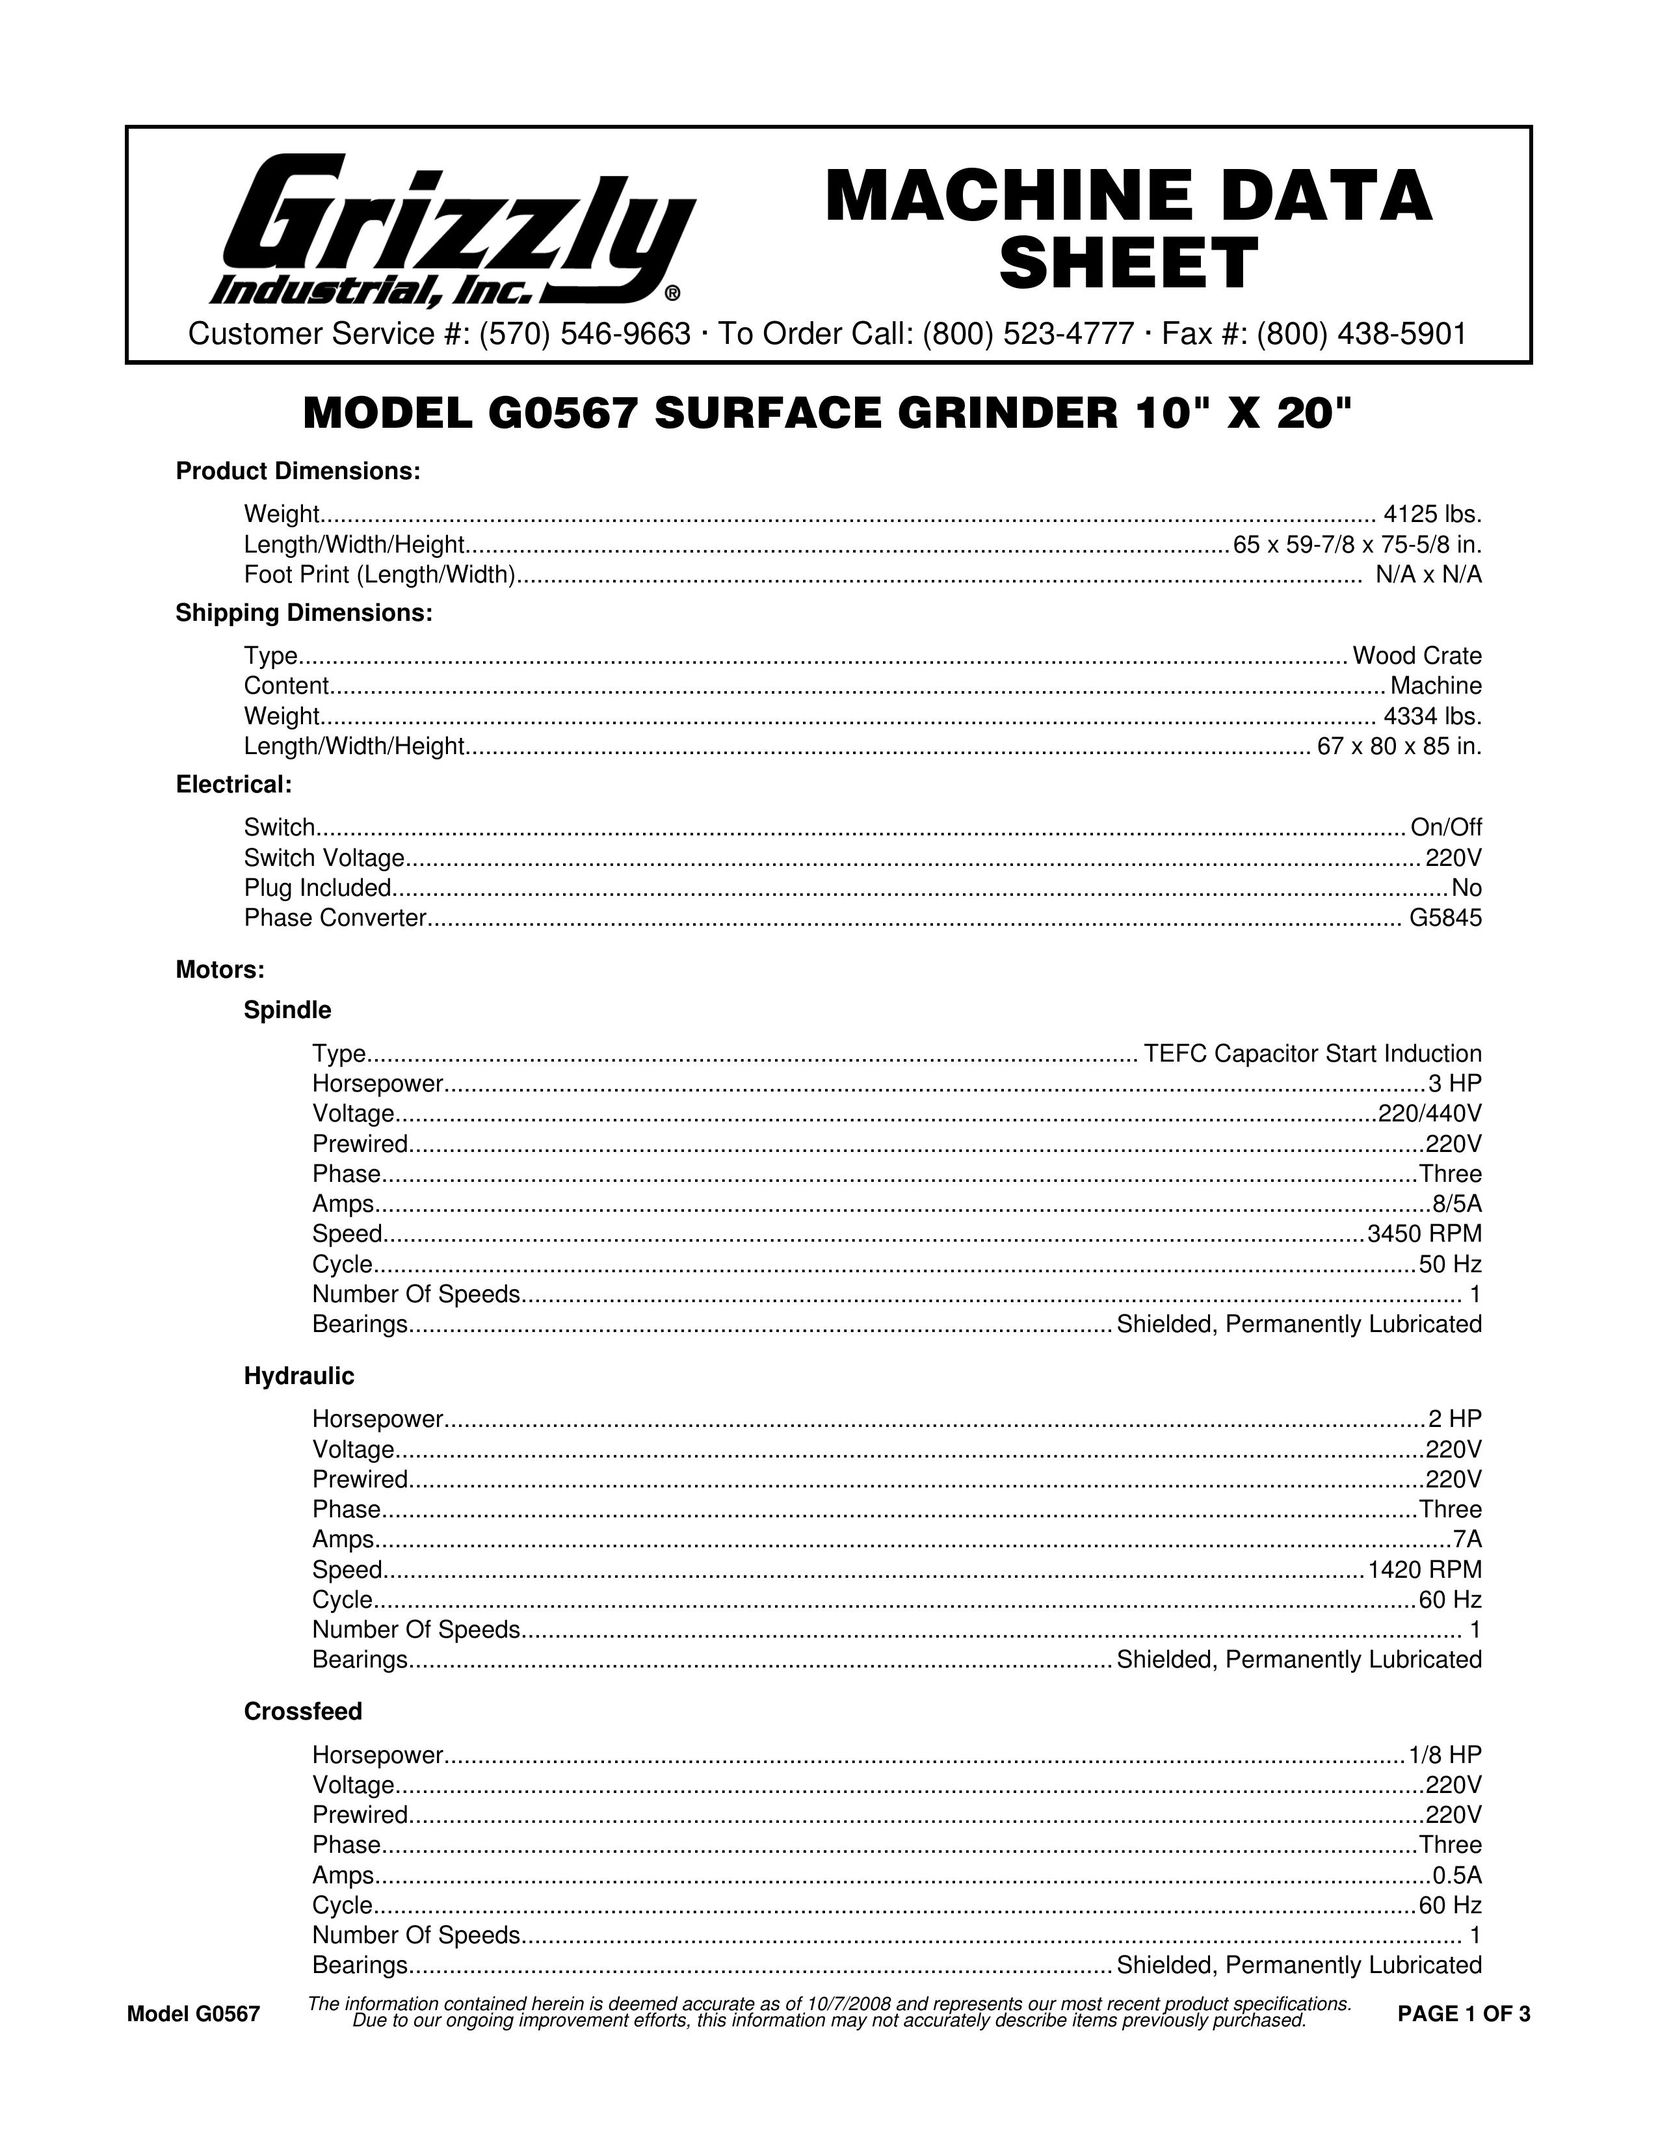 Grizzly G0567 Grinder User Manual